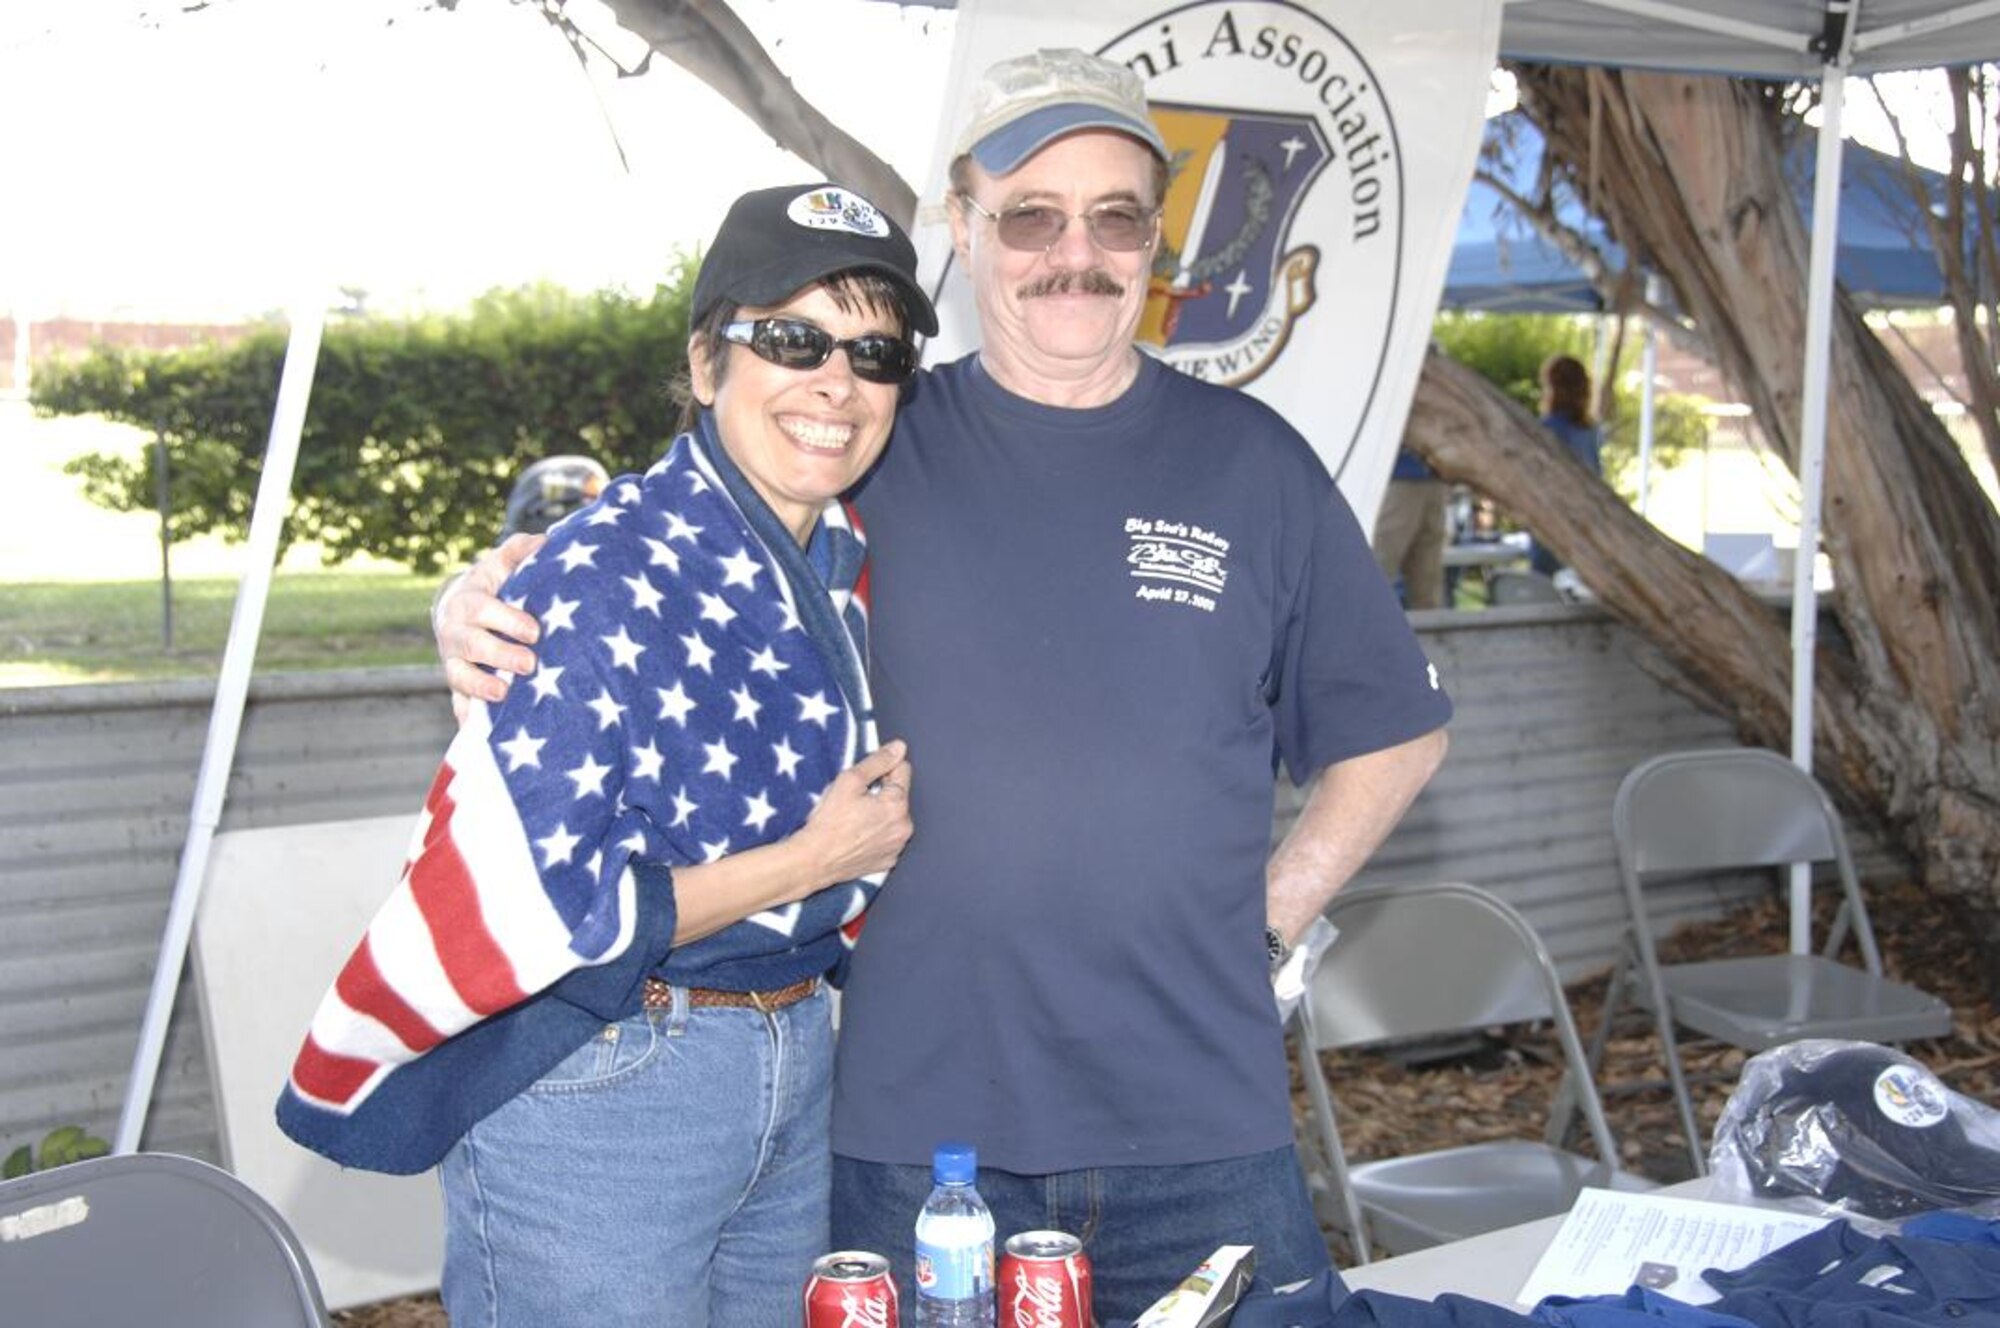 Retired 129th Rescue Wing Command Chief Master Sgt. Liliana Ramos and husband Domingo Ramos, snuggle up under the 129th RQW’s Alumni Association hospitality tent Oct. 3 at the annual Family Day Picnic hosted Oct. 4 at Moffett Federal Airfield, Calif. (Air National Guard photo by Master Sgt. Dan Kacir)